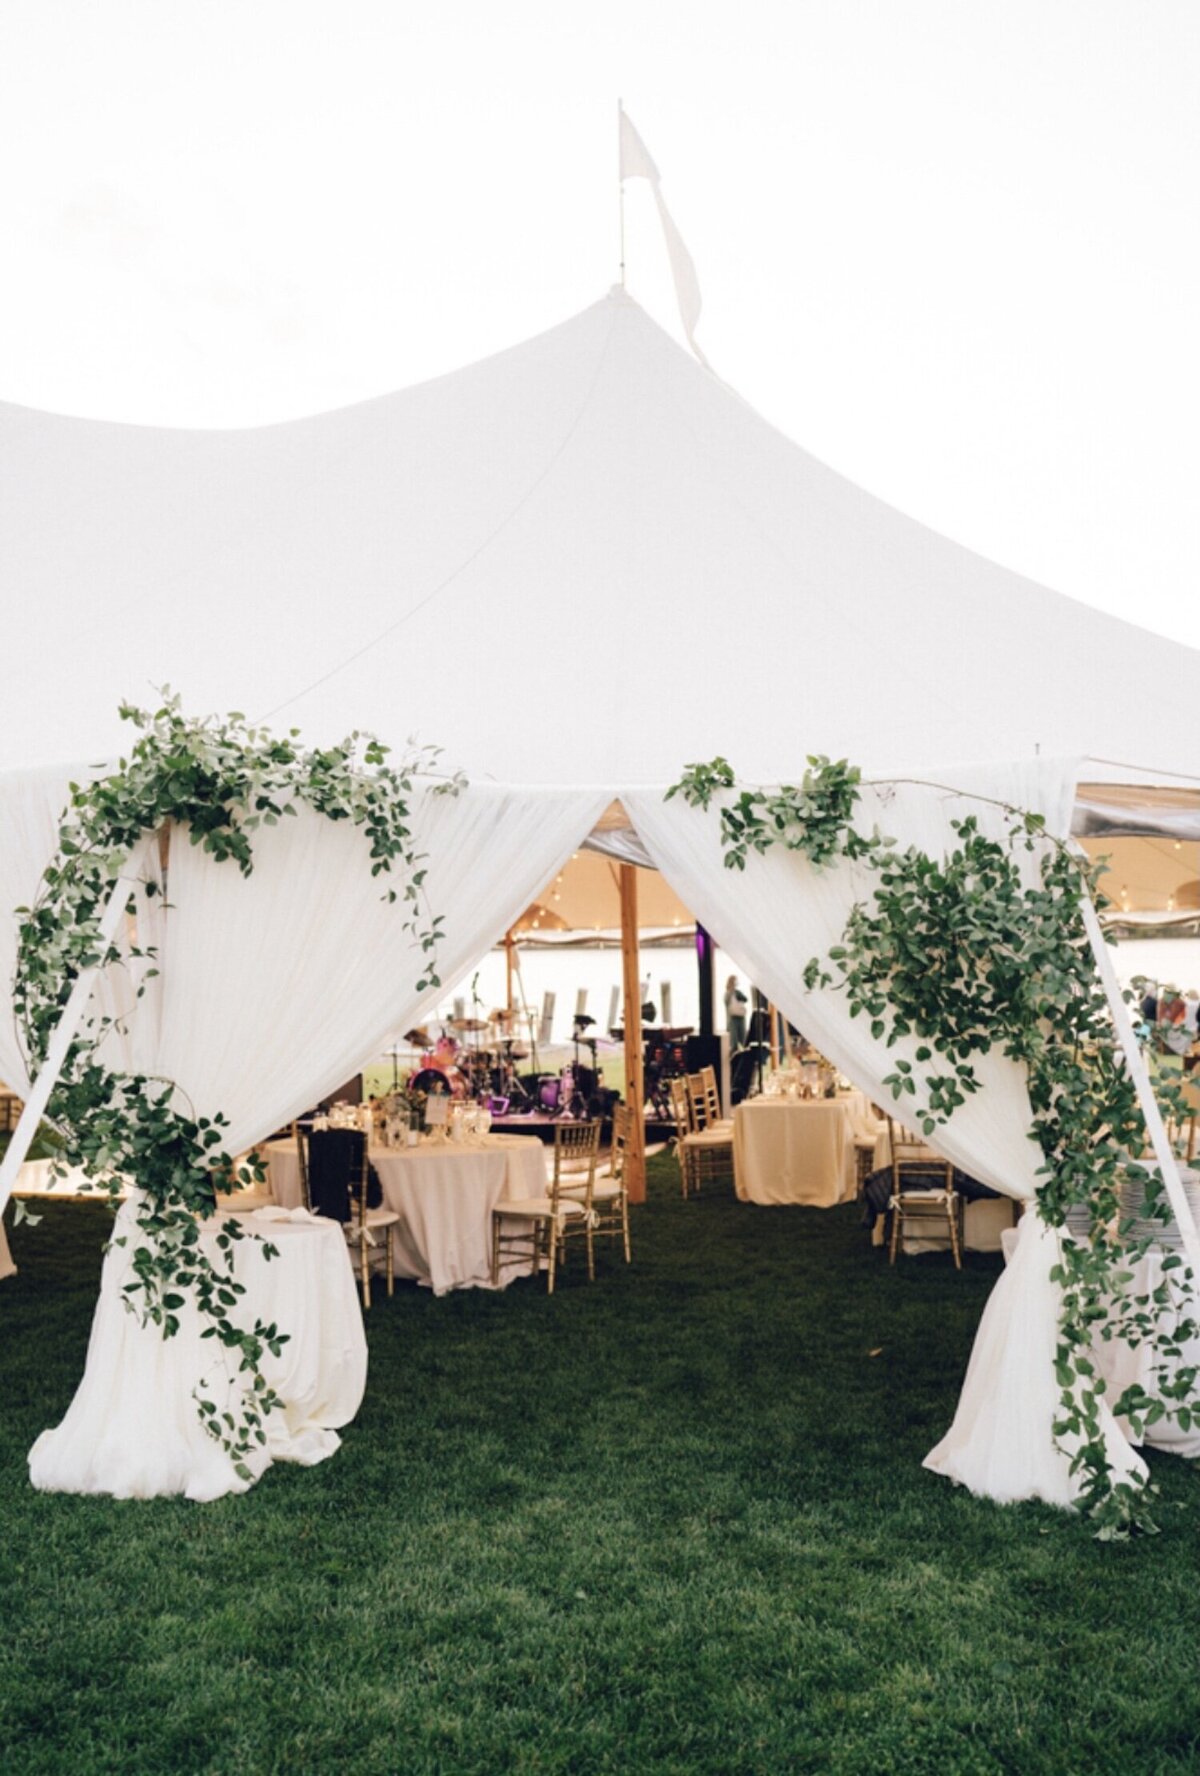 wedding-tent-draping-ct-ez-occasions-6